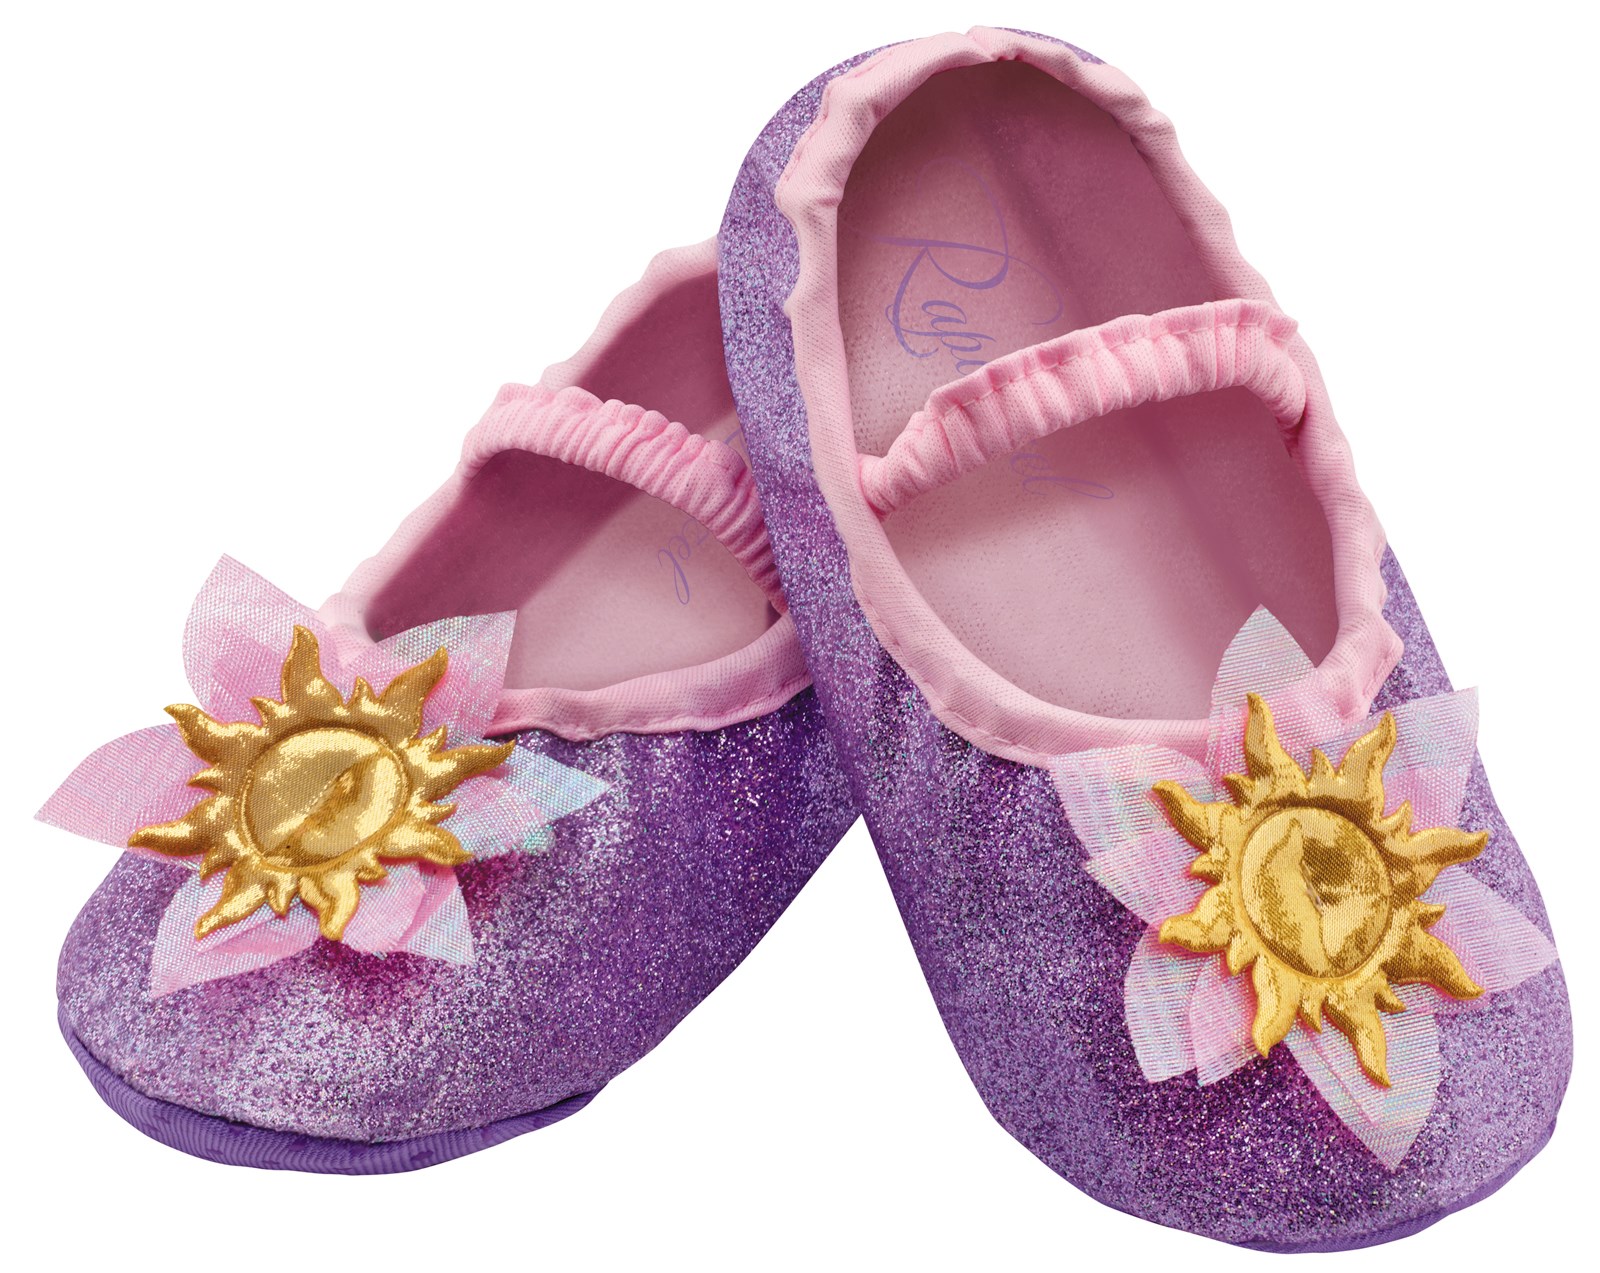 Disney Princess Rapunzel Slippers For Toddlers